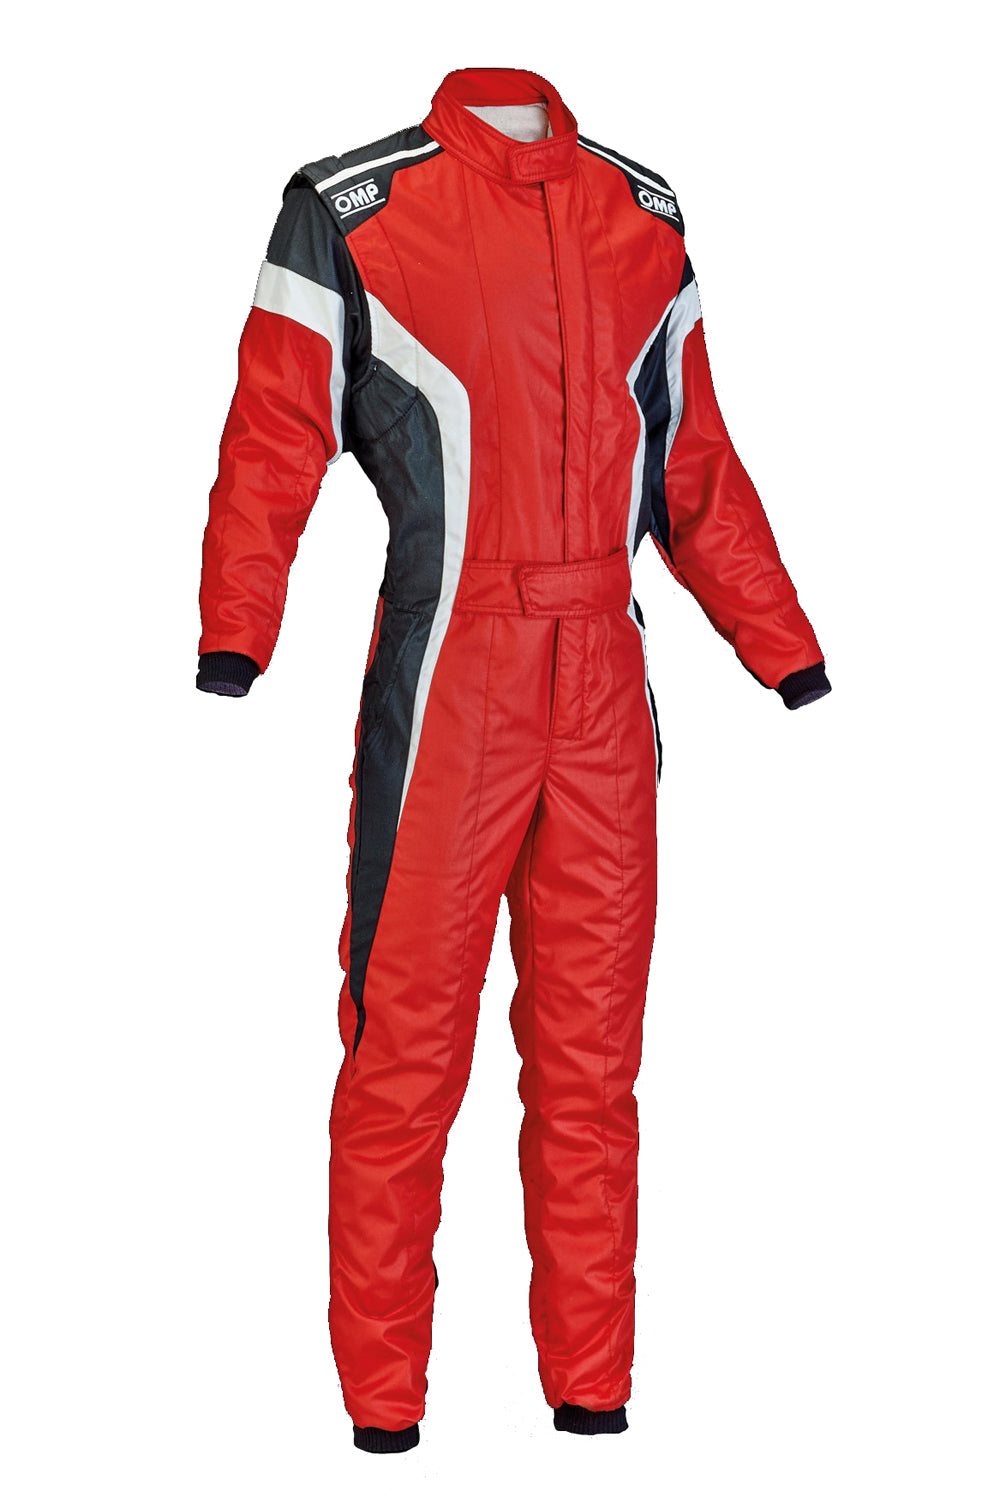 TECNICA-S Suit Red White Size 50